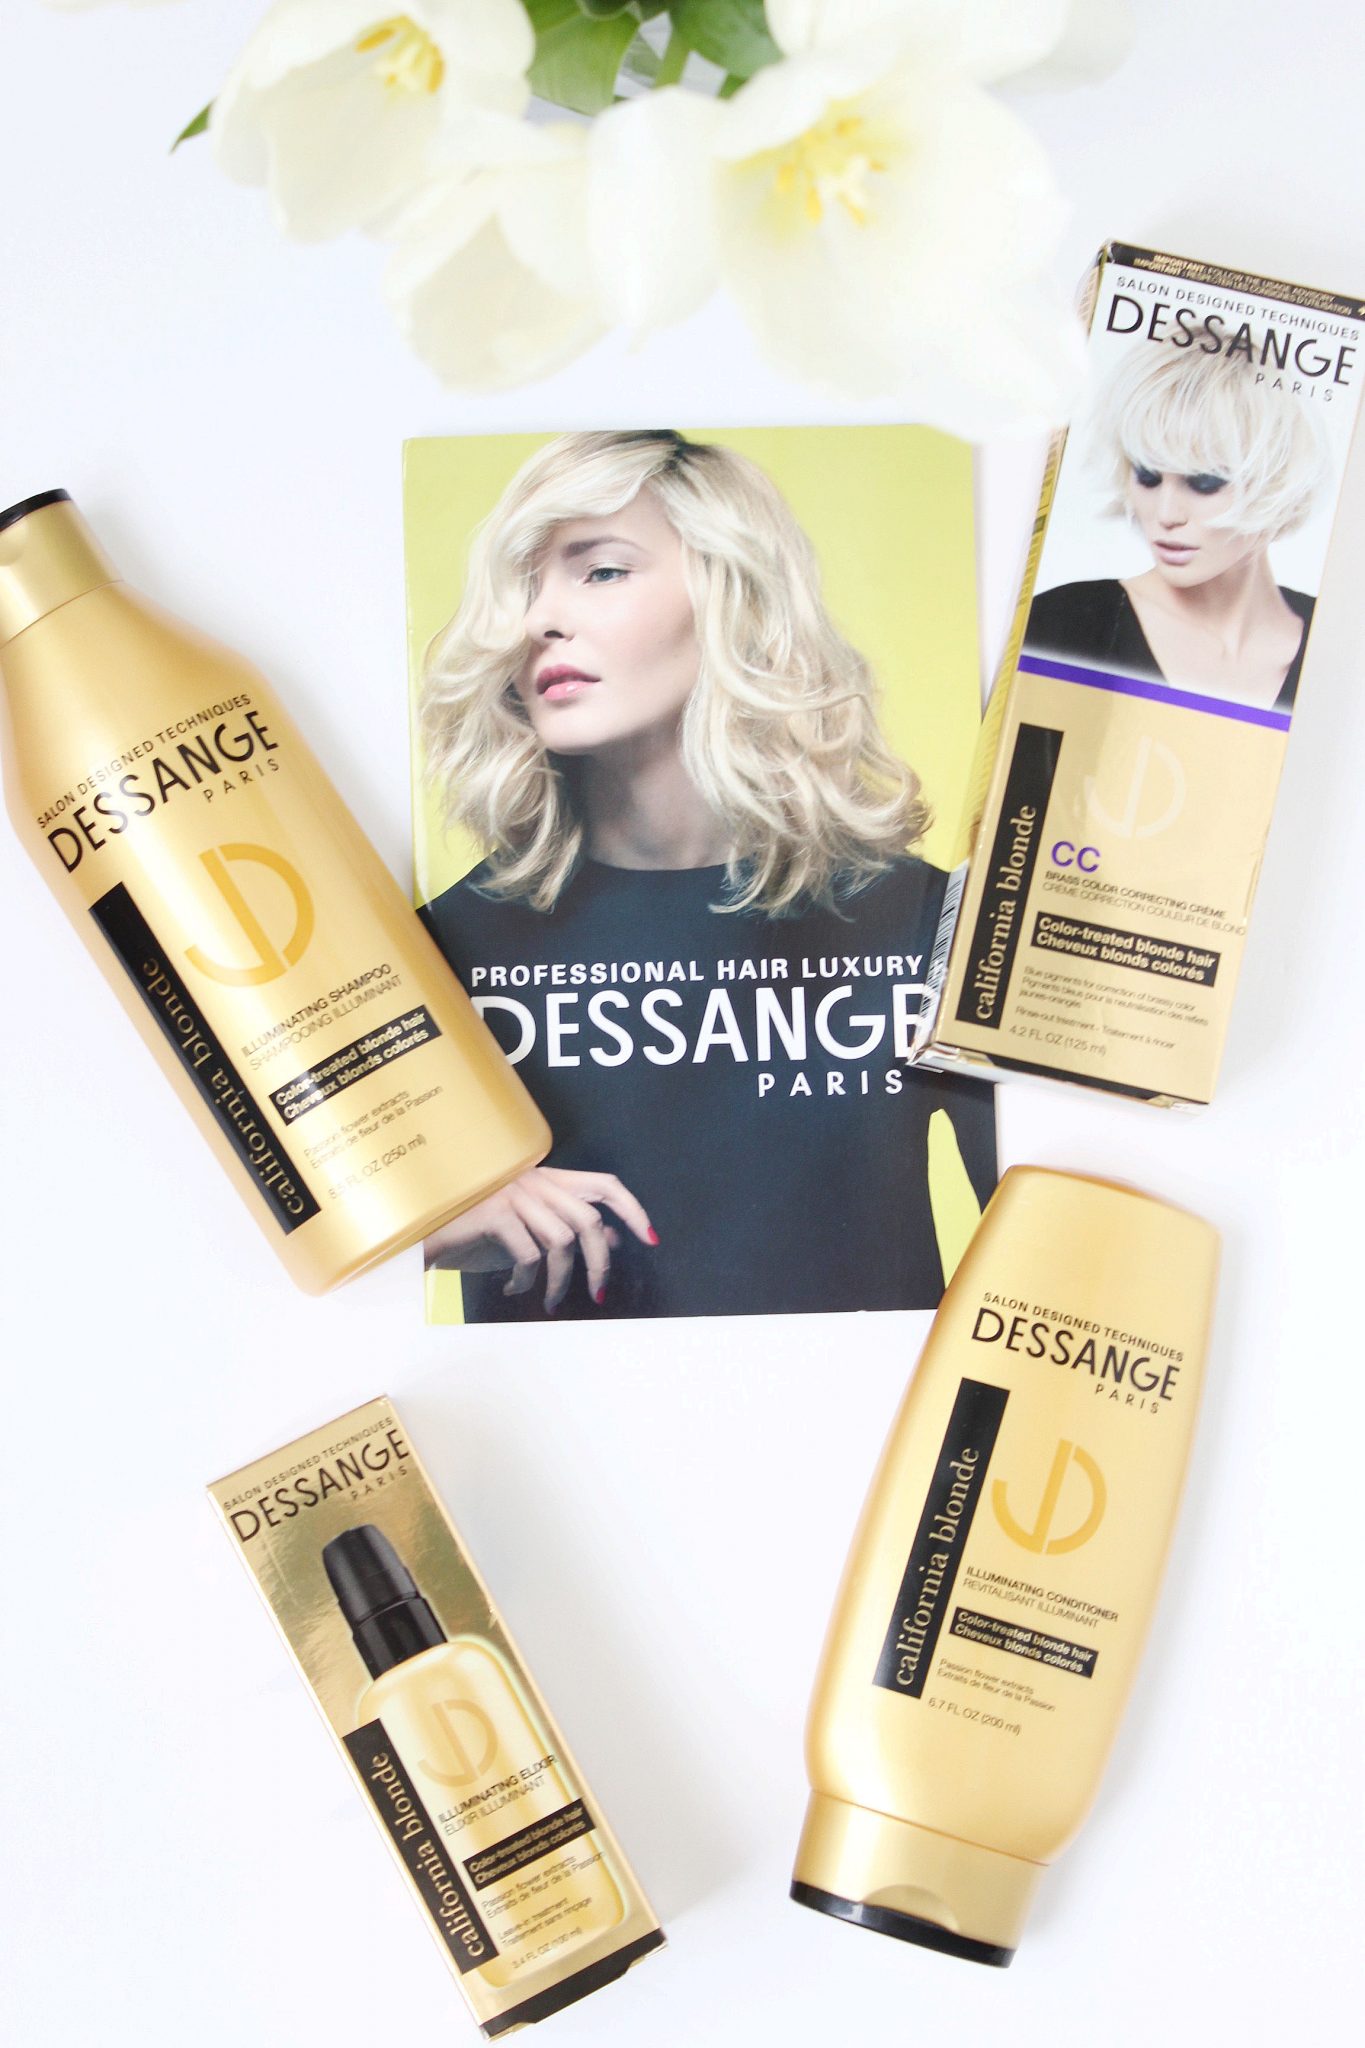 Keeping my blonde in check with the Dessange California blonde range